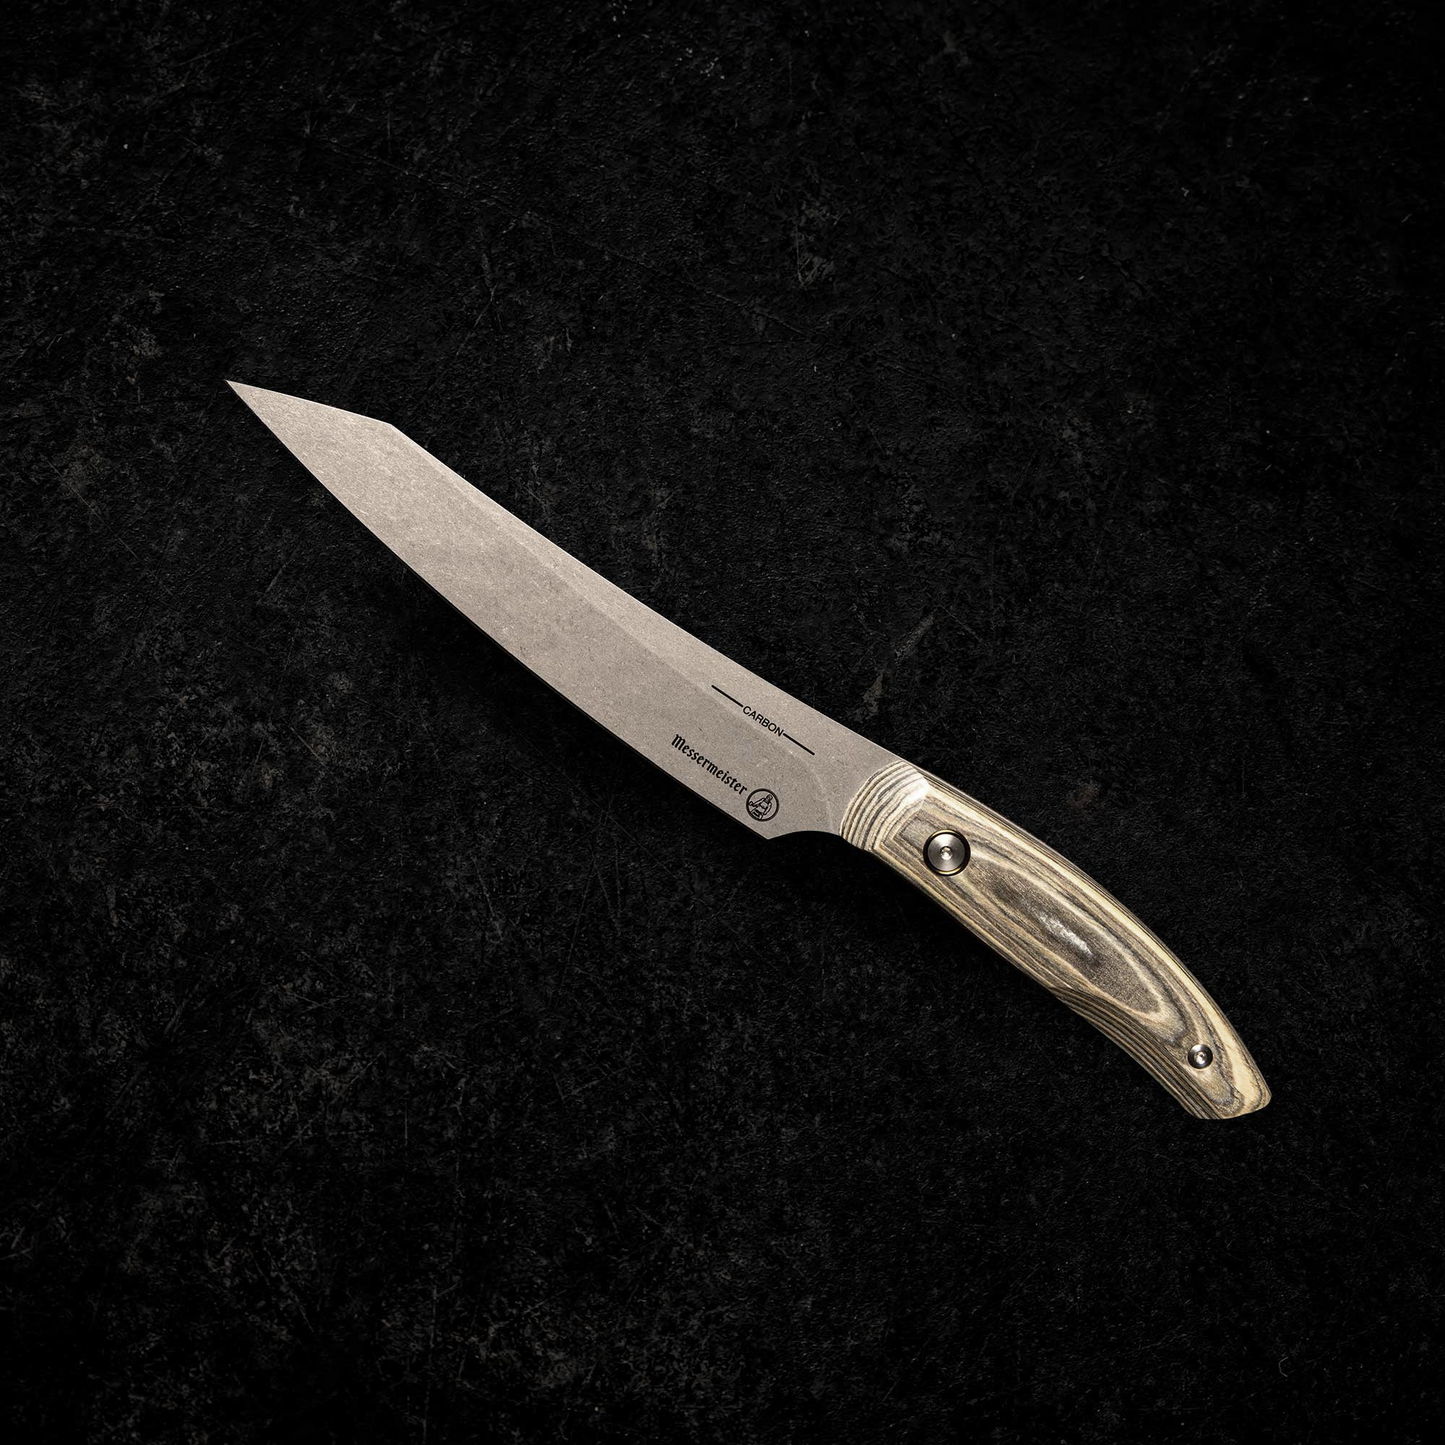 Carbon - 6 Inch Utility Knife